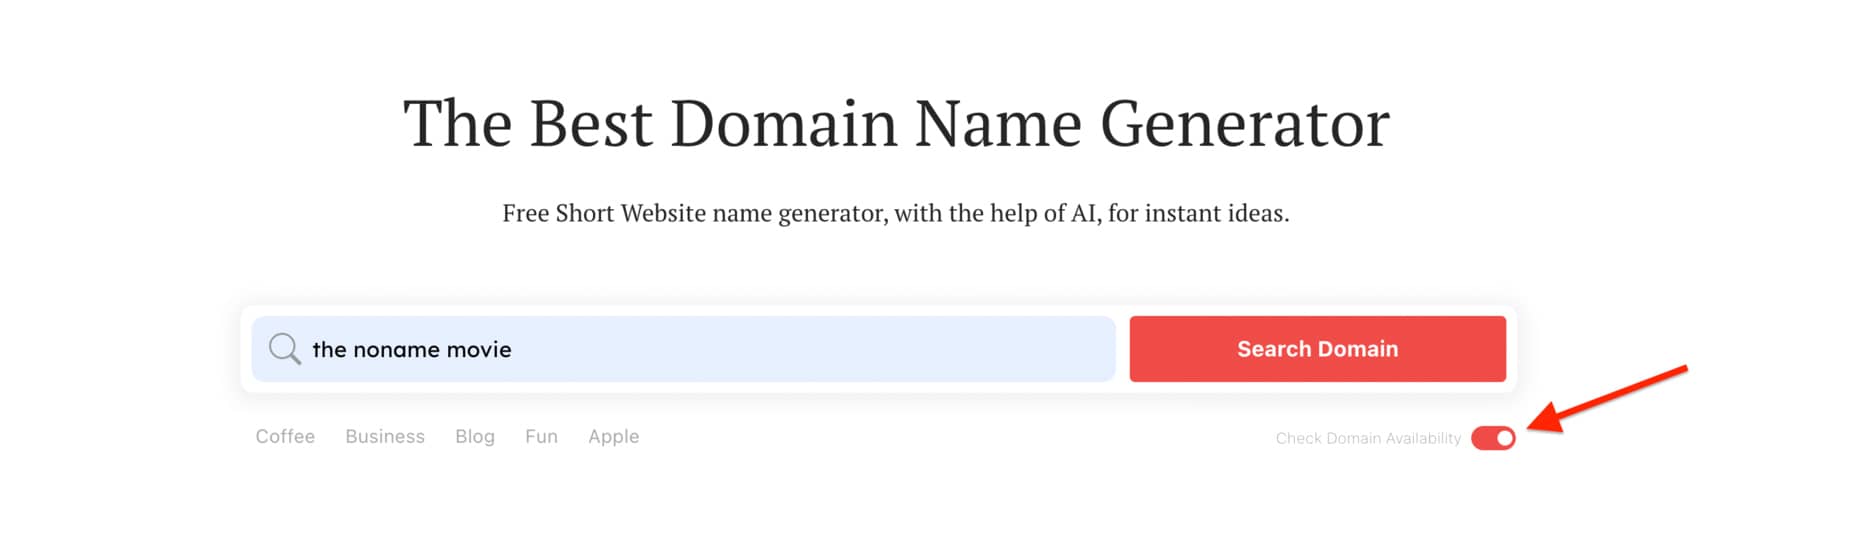 Movie name generator option for checking domain availability